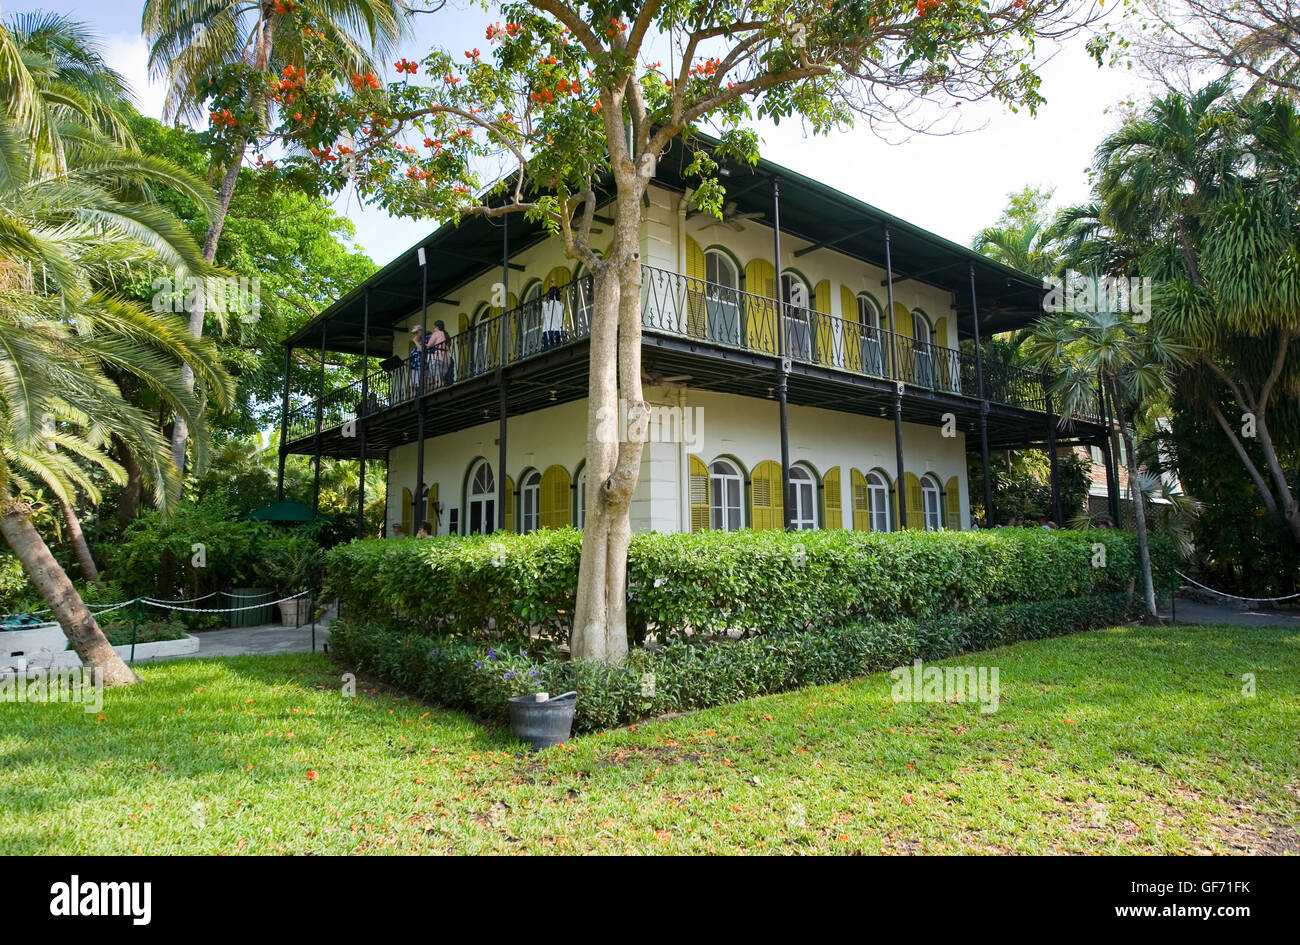 KEY WEST, FLORIDA, USA - MAY 03, 2016: The Ernest Hemingway House with garden in Key West in Florida. Stock Photo